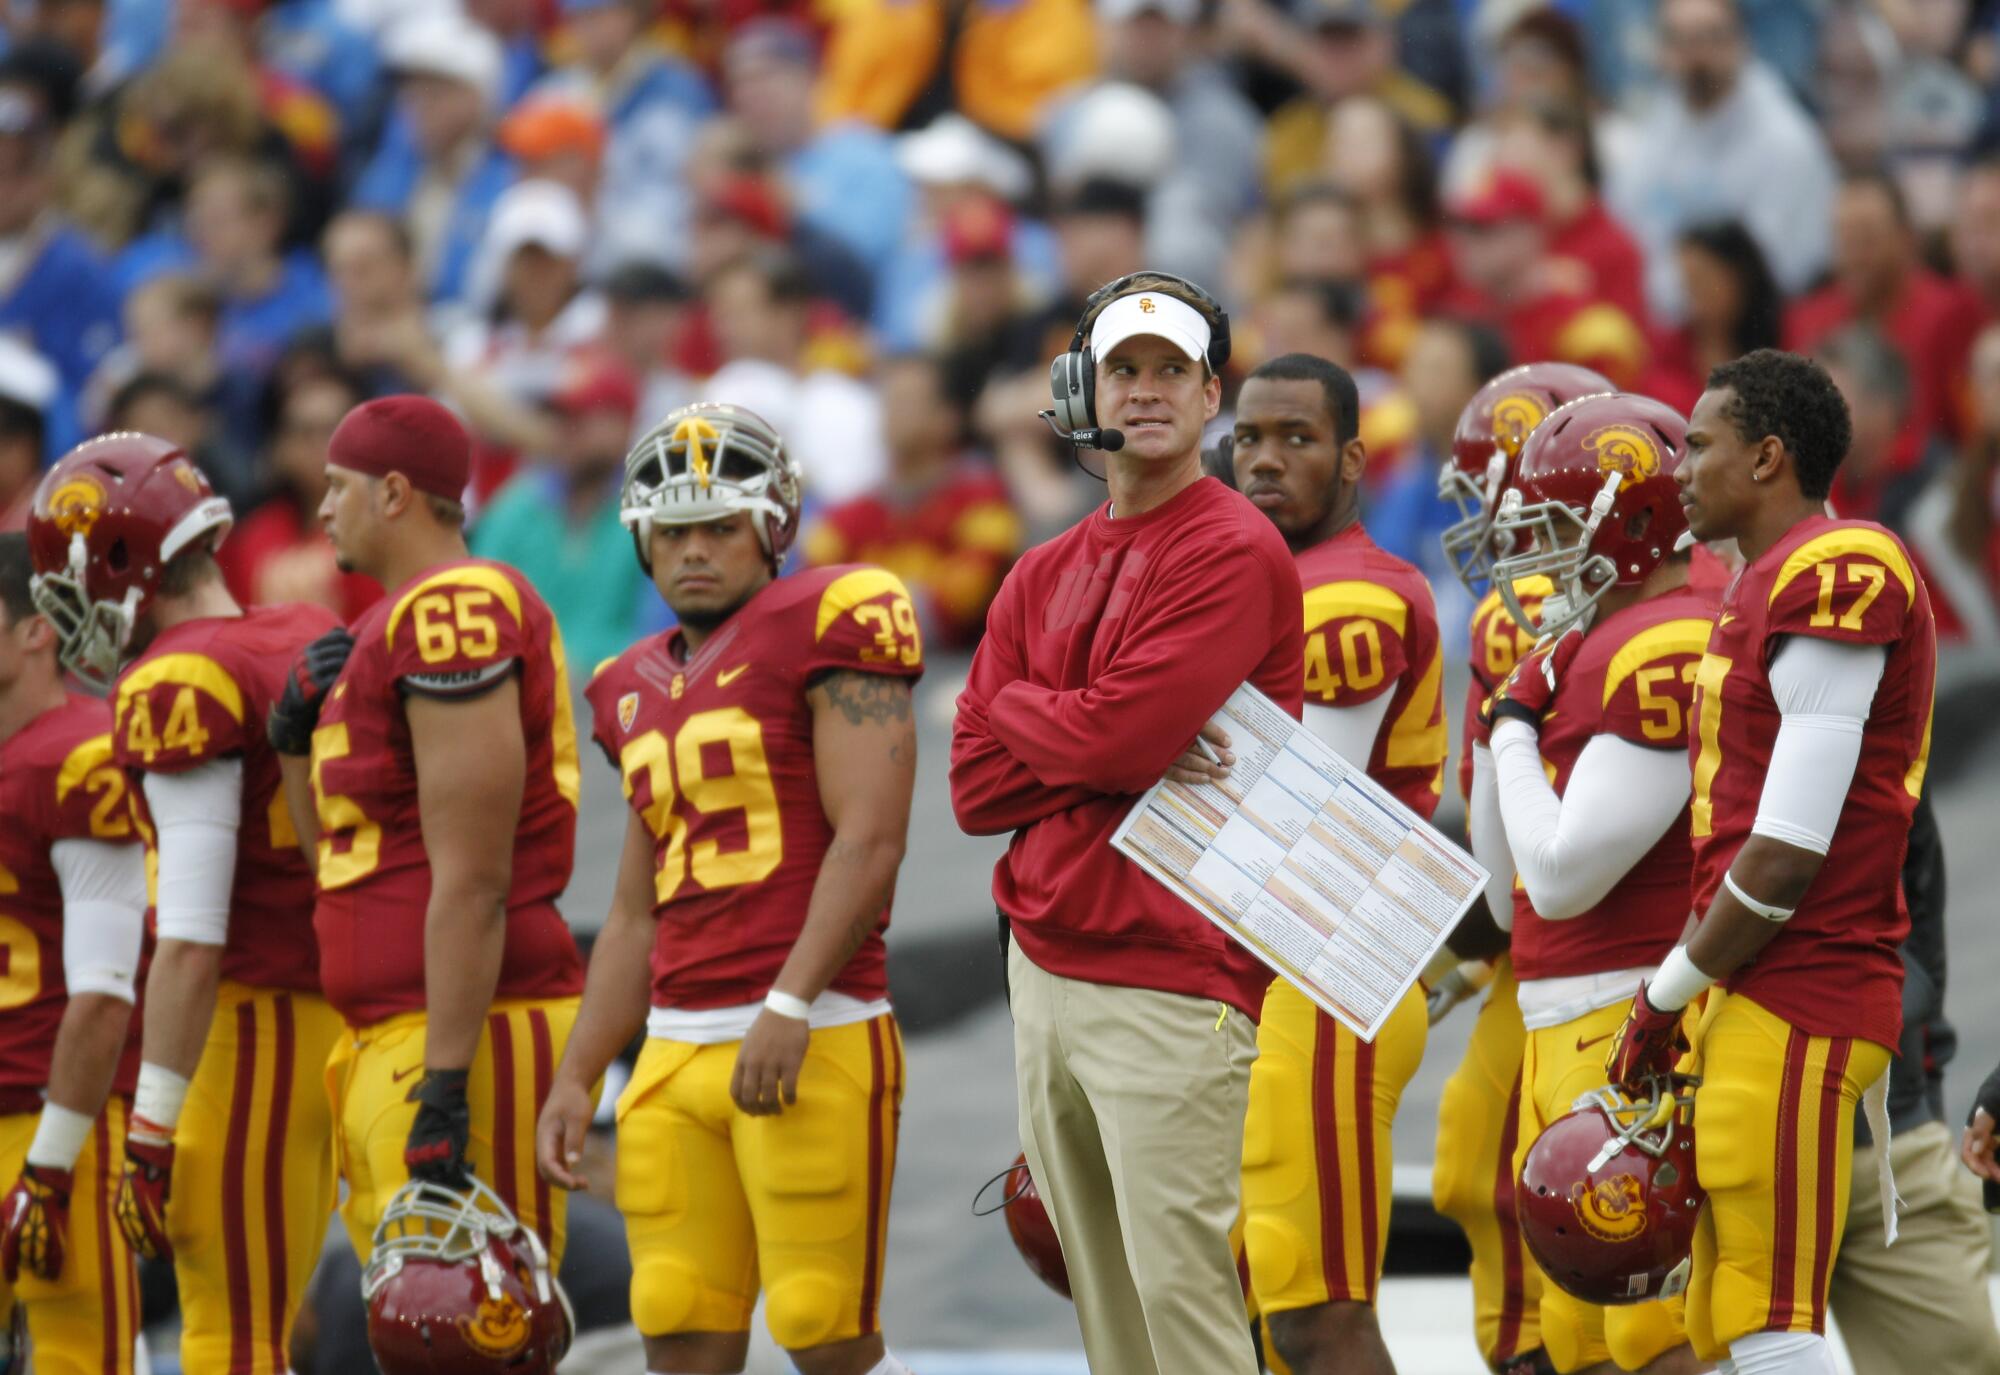 USC coach Lane Kiffin looks at scoreboard with USC down 24-0 to UCLA at the Rose Bowl.